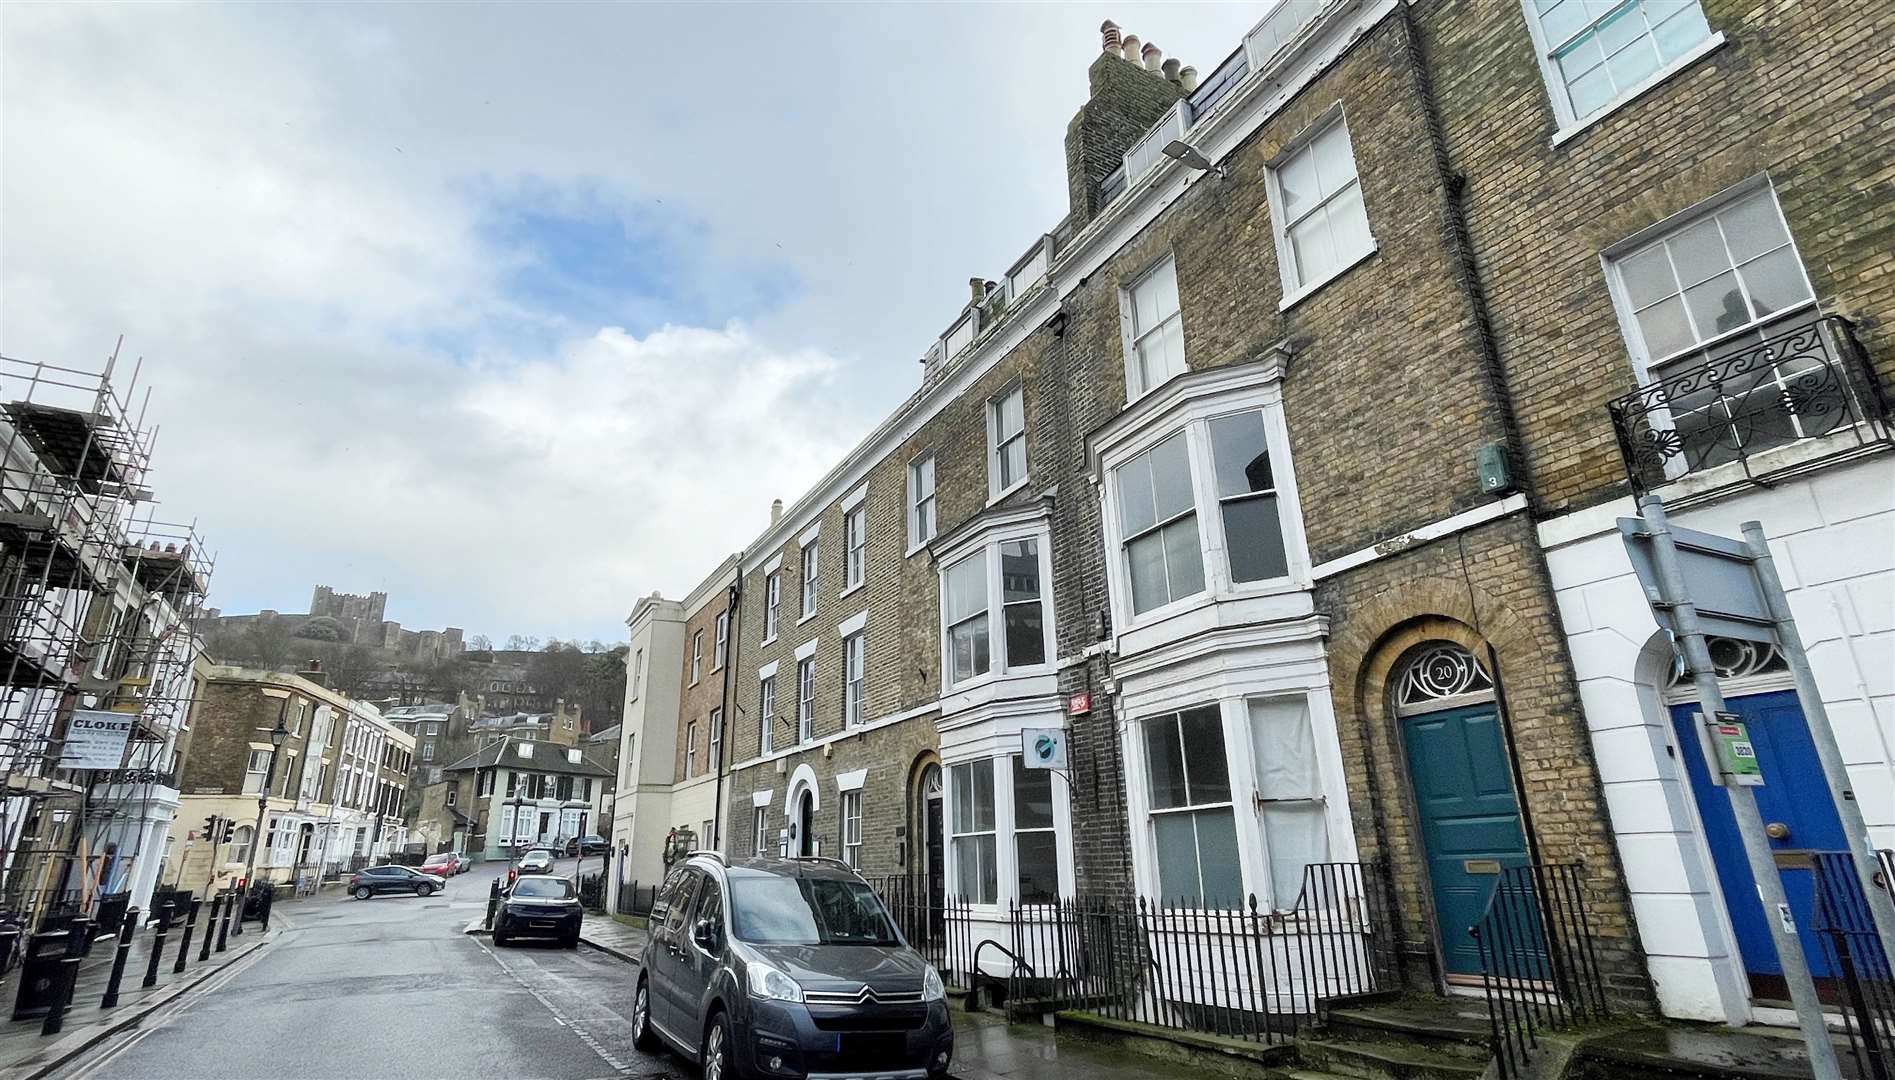 This five storey mid-terrace period building in Dover sold for £292,000.